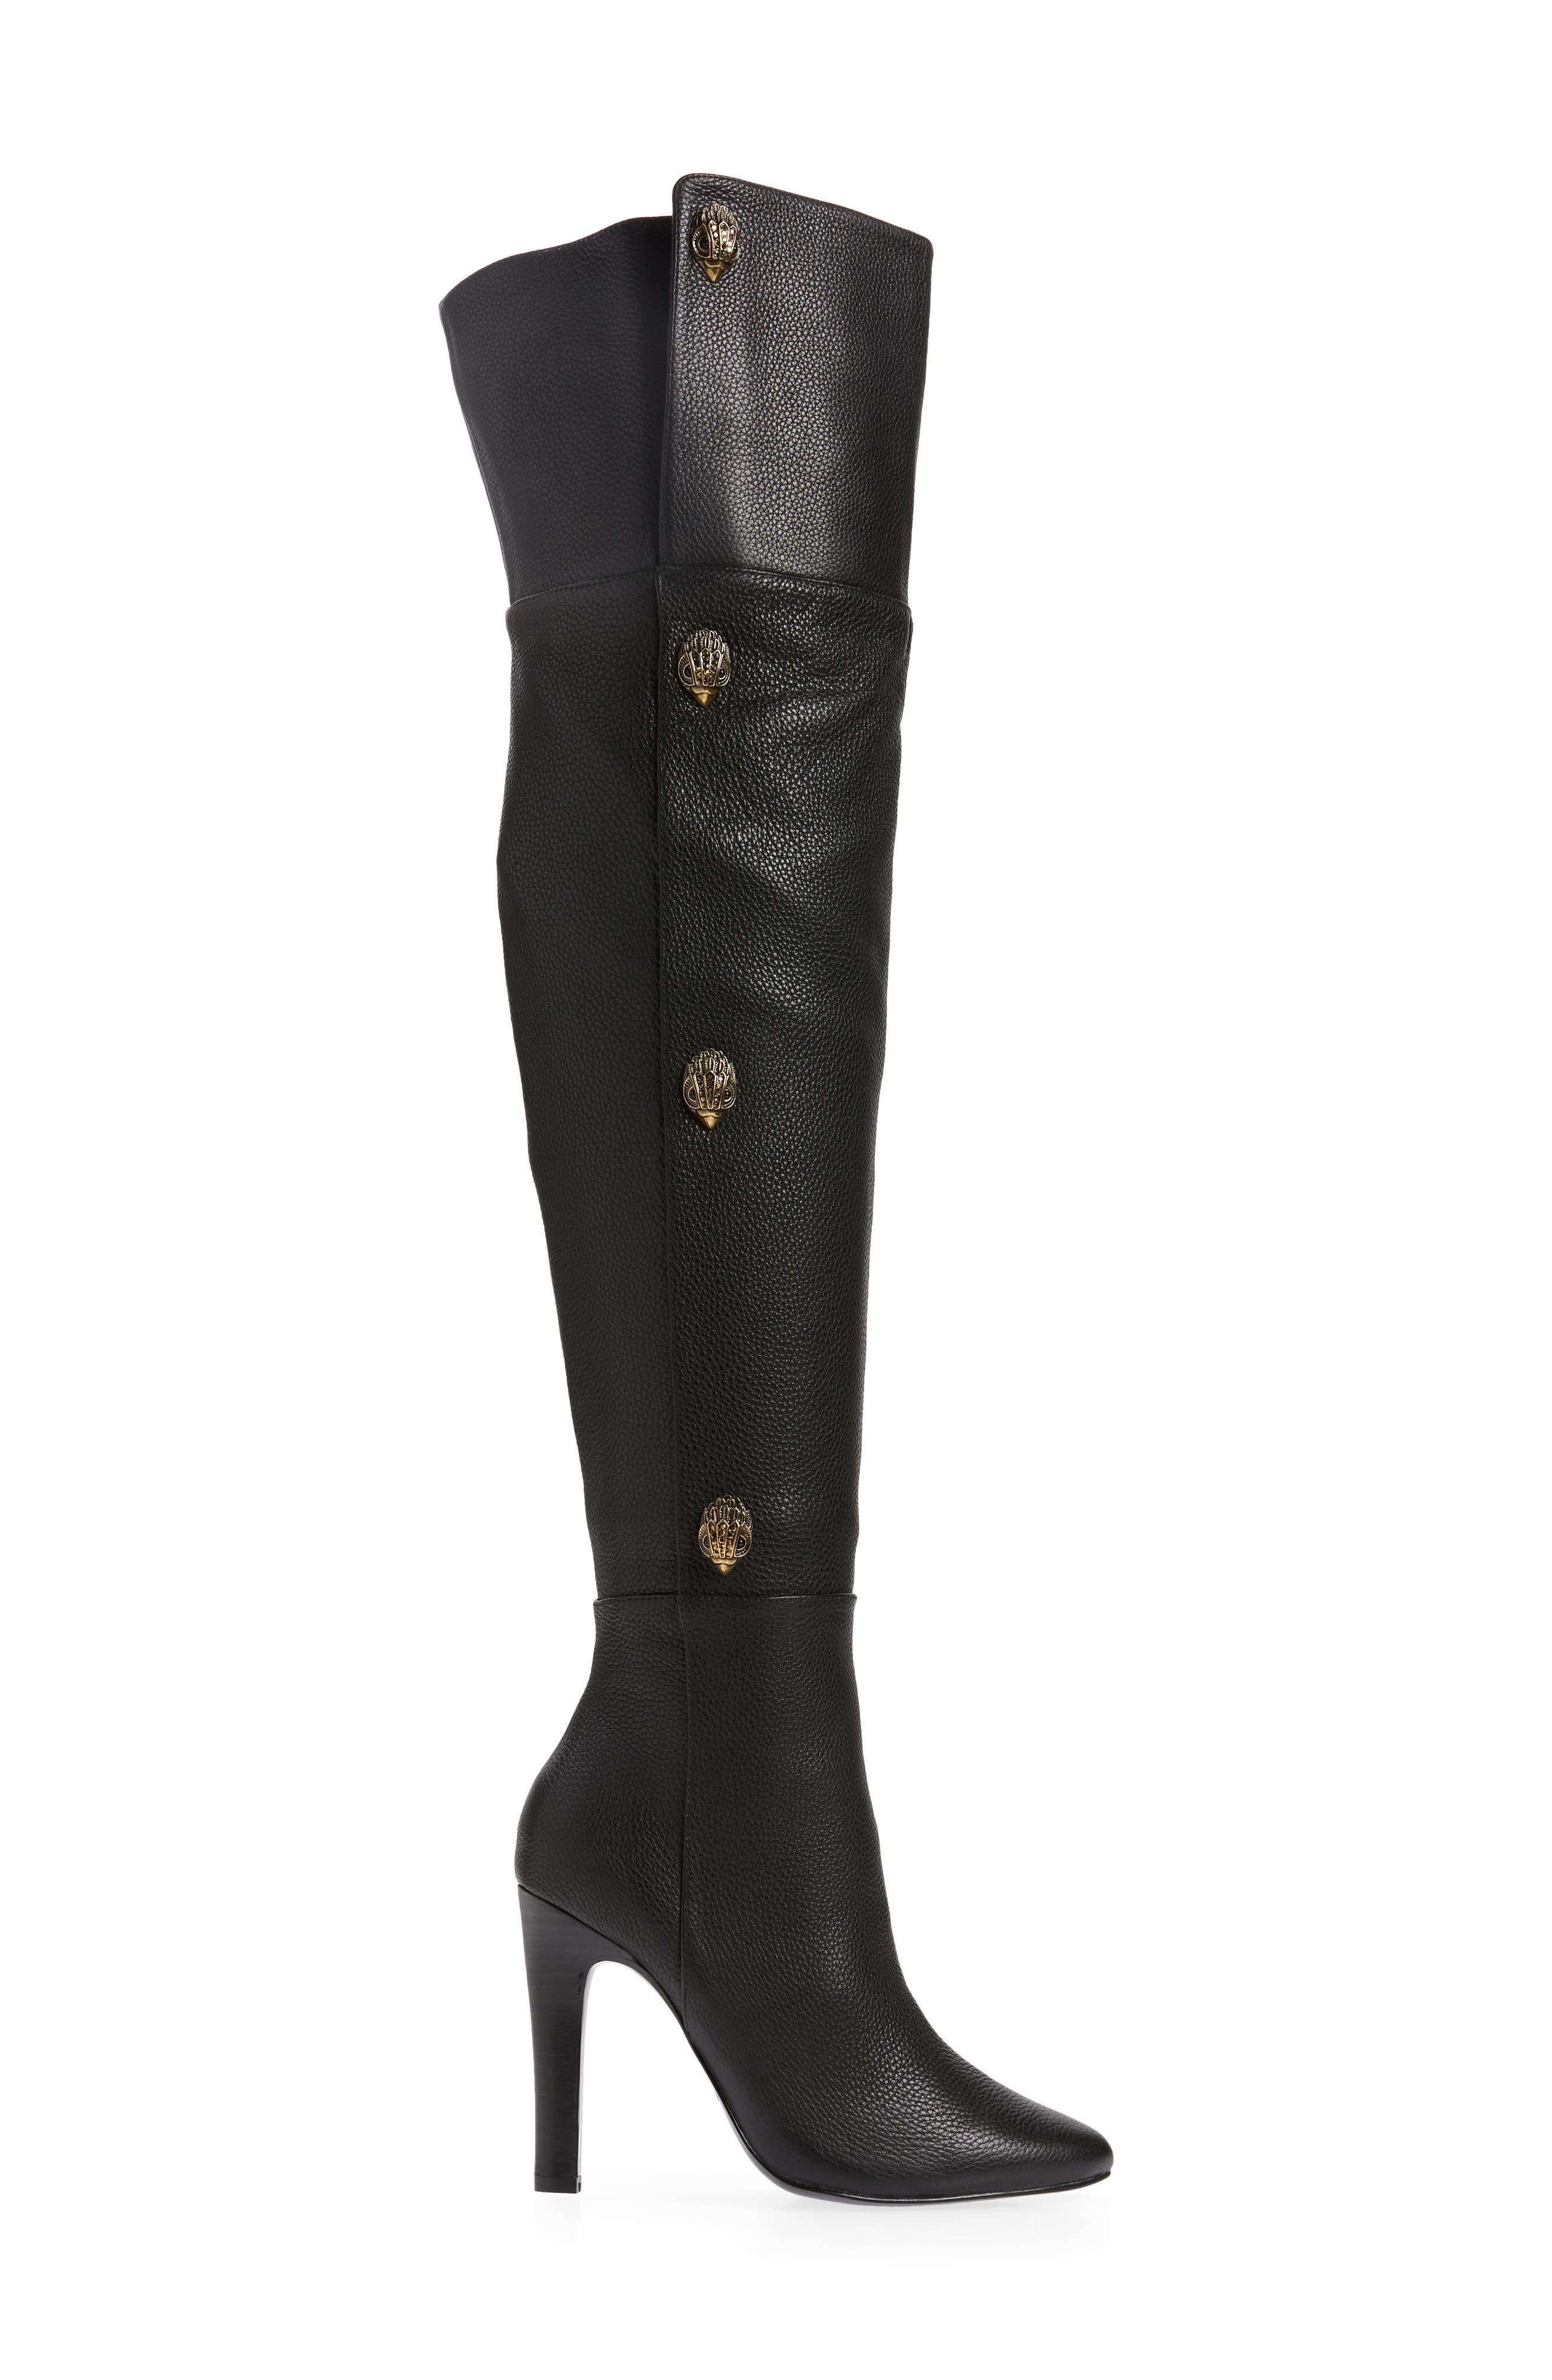 Kurt Geiger Shoreditch Patent-leather Over-the-knee Boots in Black Womens Shoes Boots Over-the-knee boots 